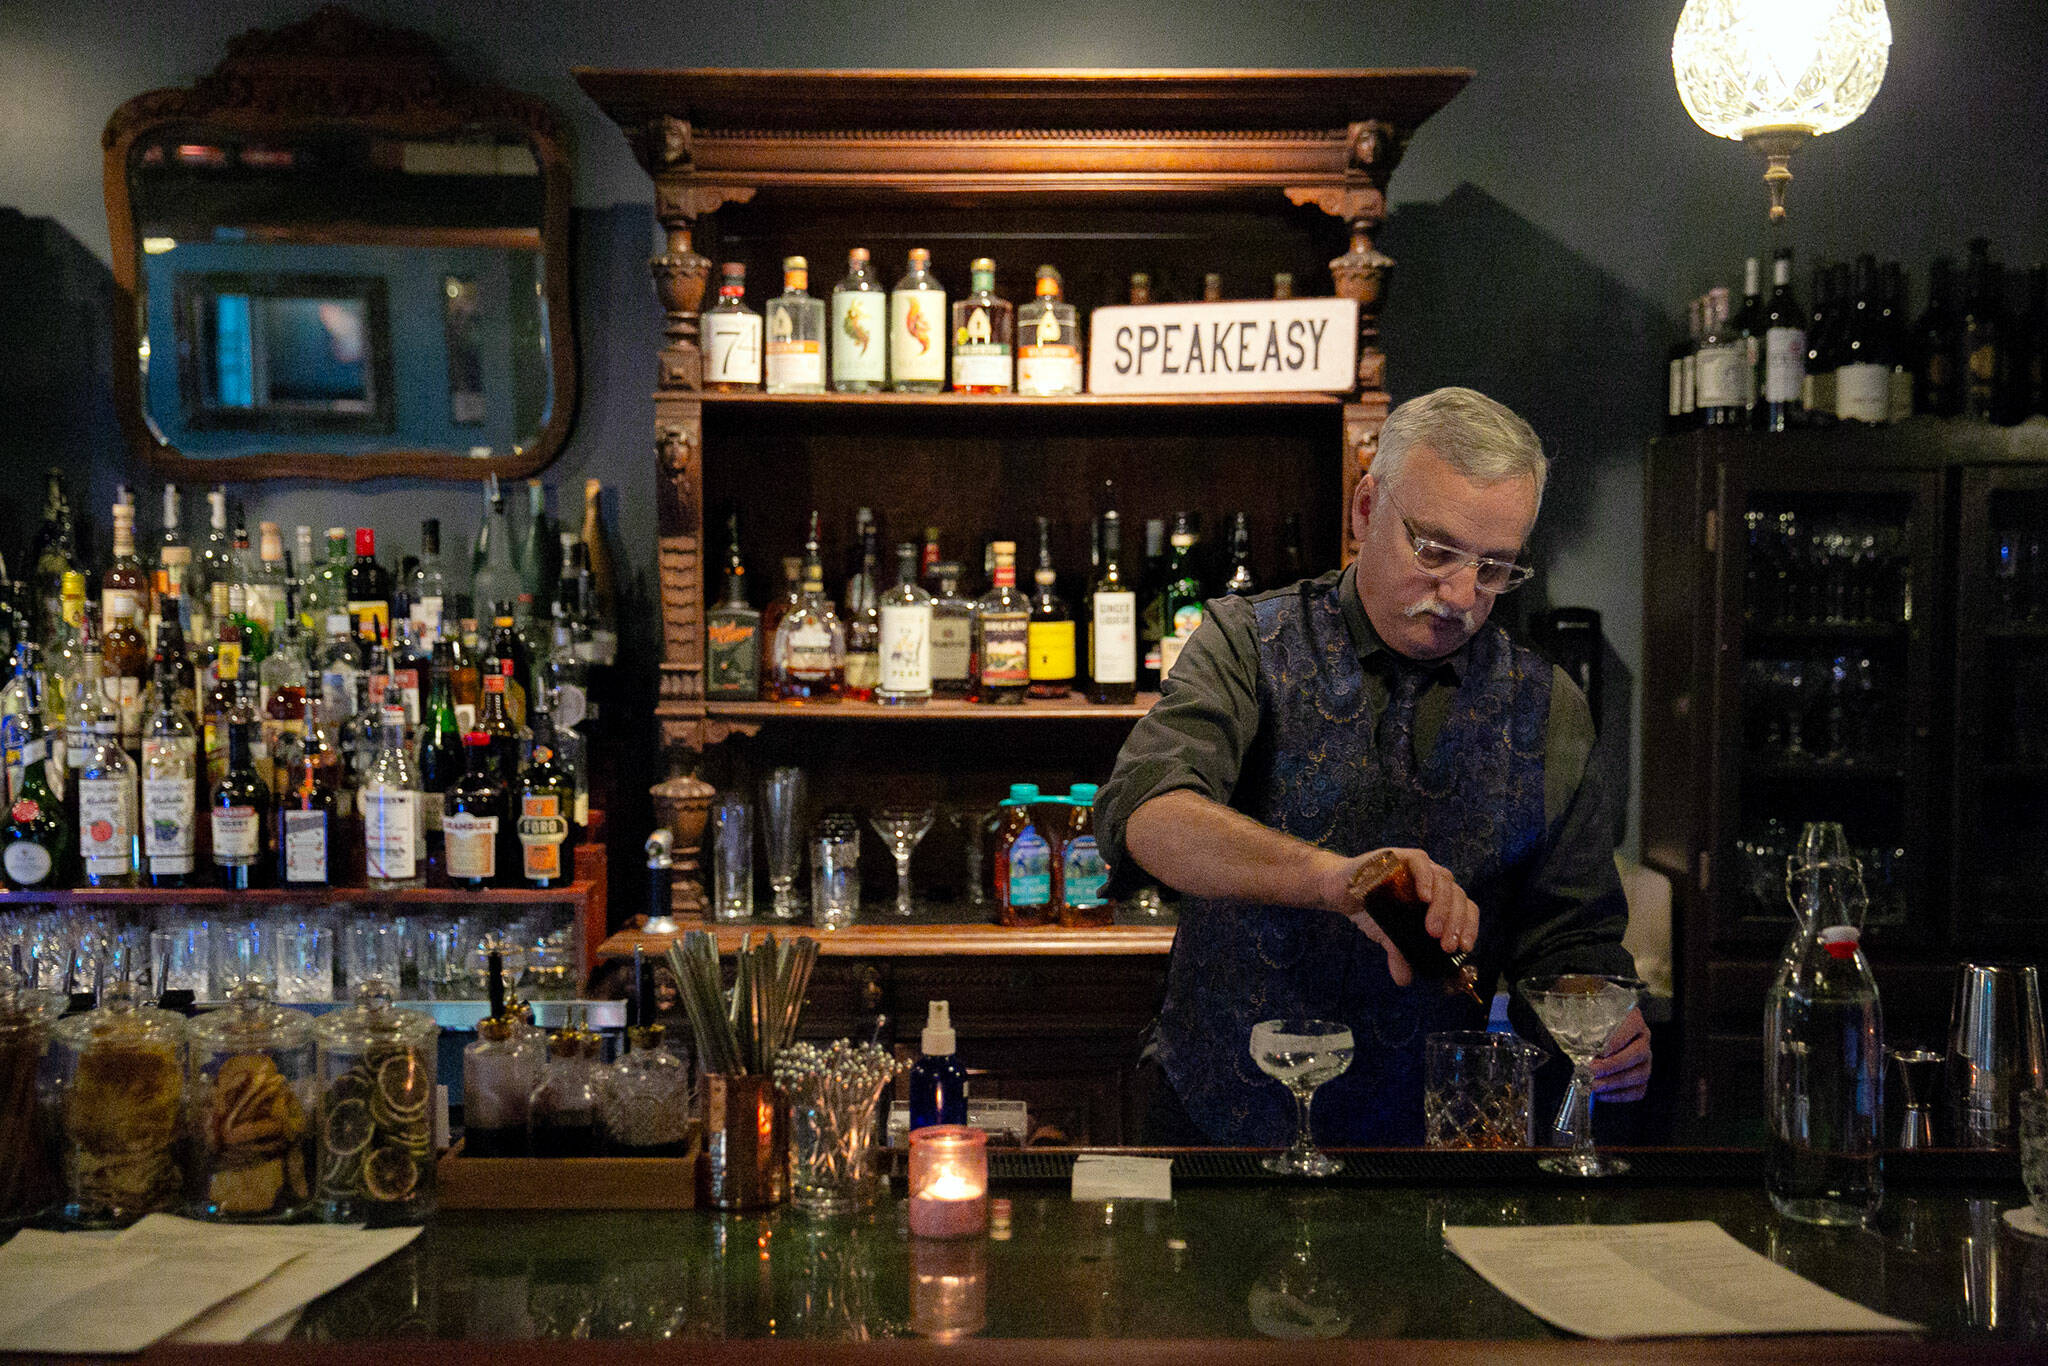 Everett speakeasy offers old-fashioned charm (and charming Old Fashioneds)  | HeraldNet.com